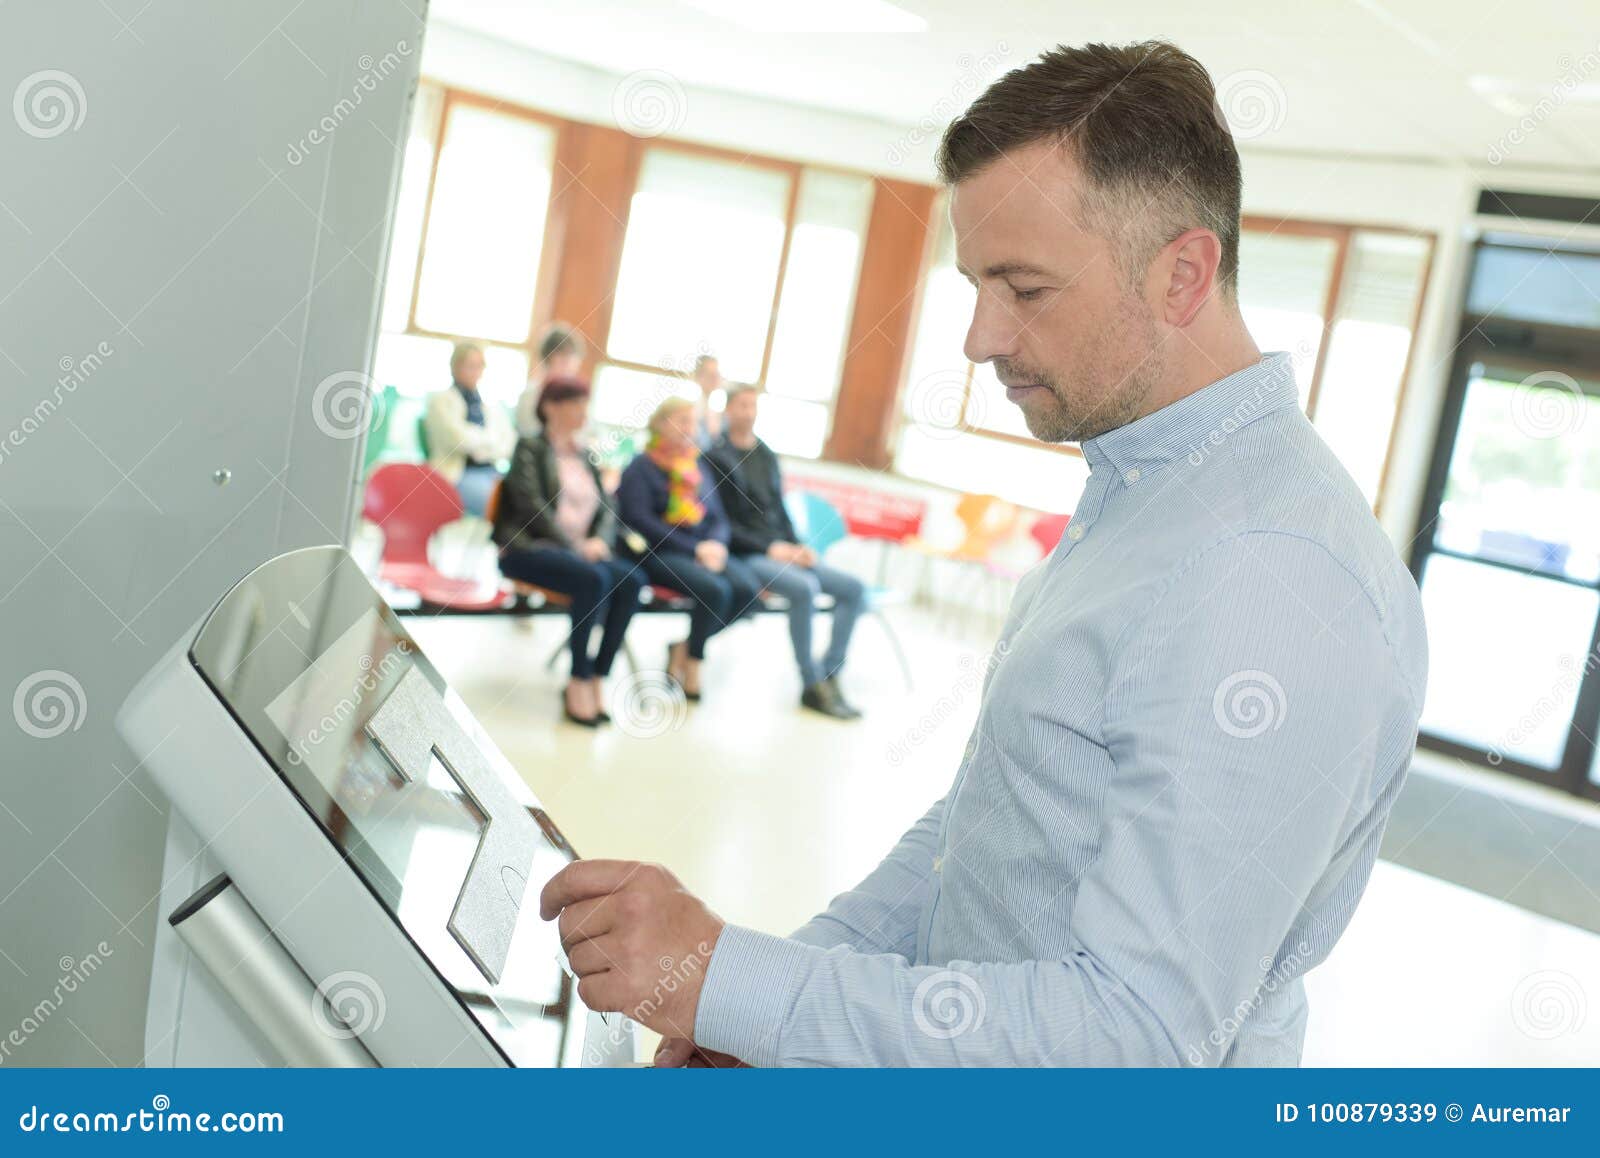 Man Doing Check In At Self Help Desk In Airport Stock Image